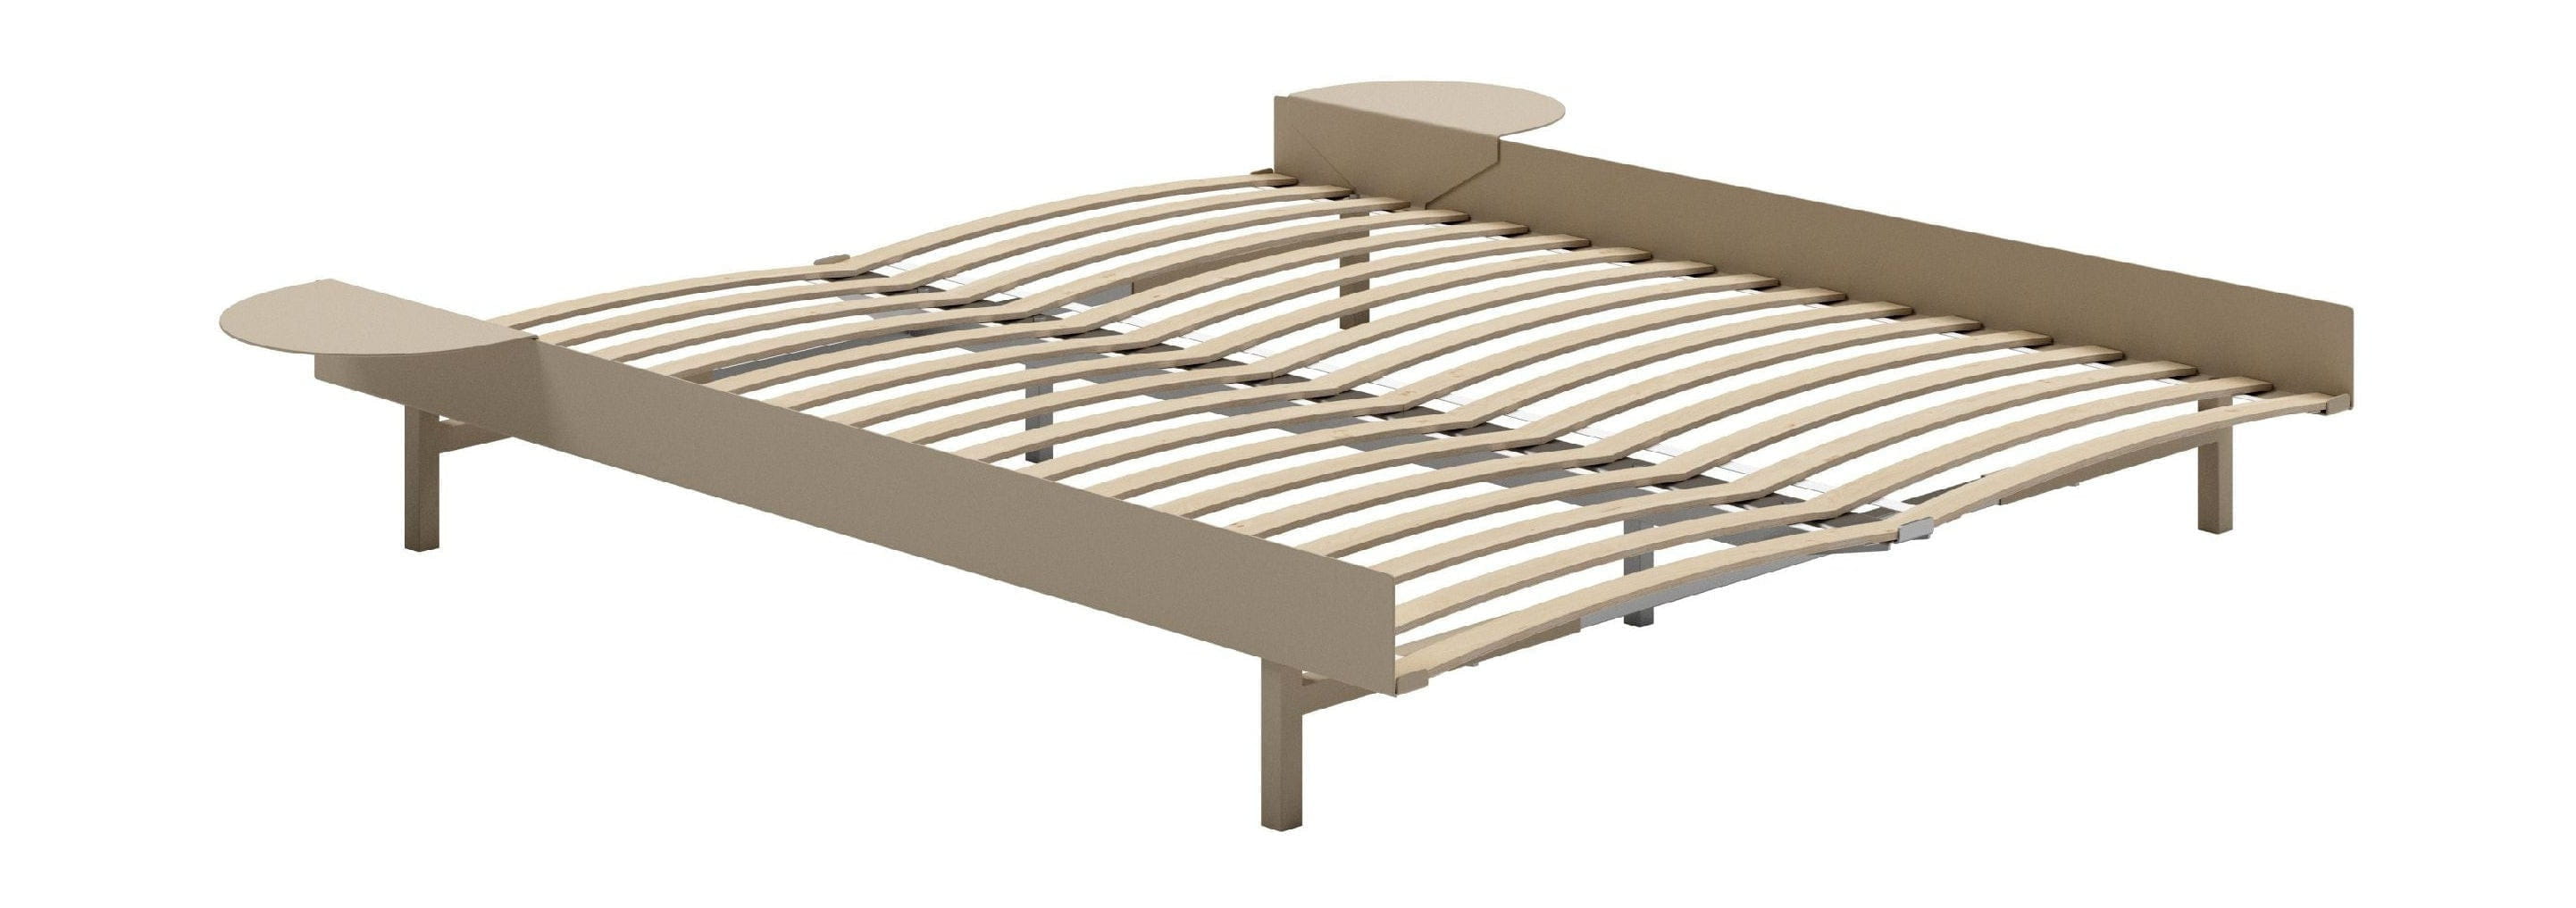 Moebe Bed With Bed Slats And 2 Bedside Tables 160 Cm, Sand